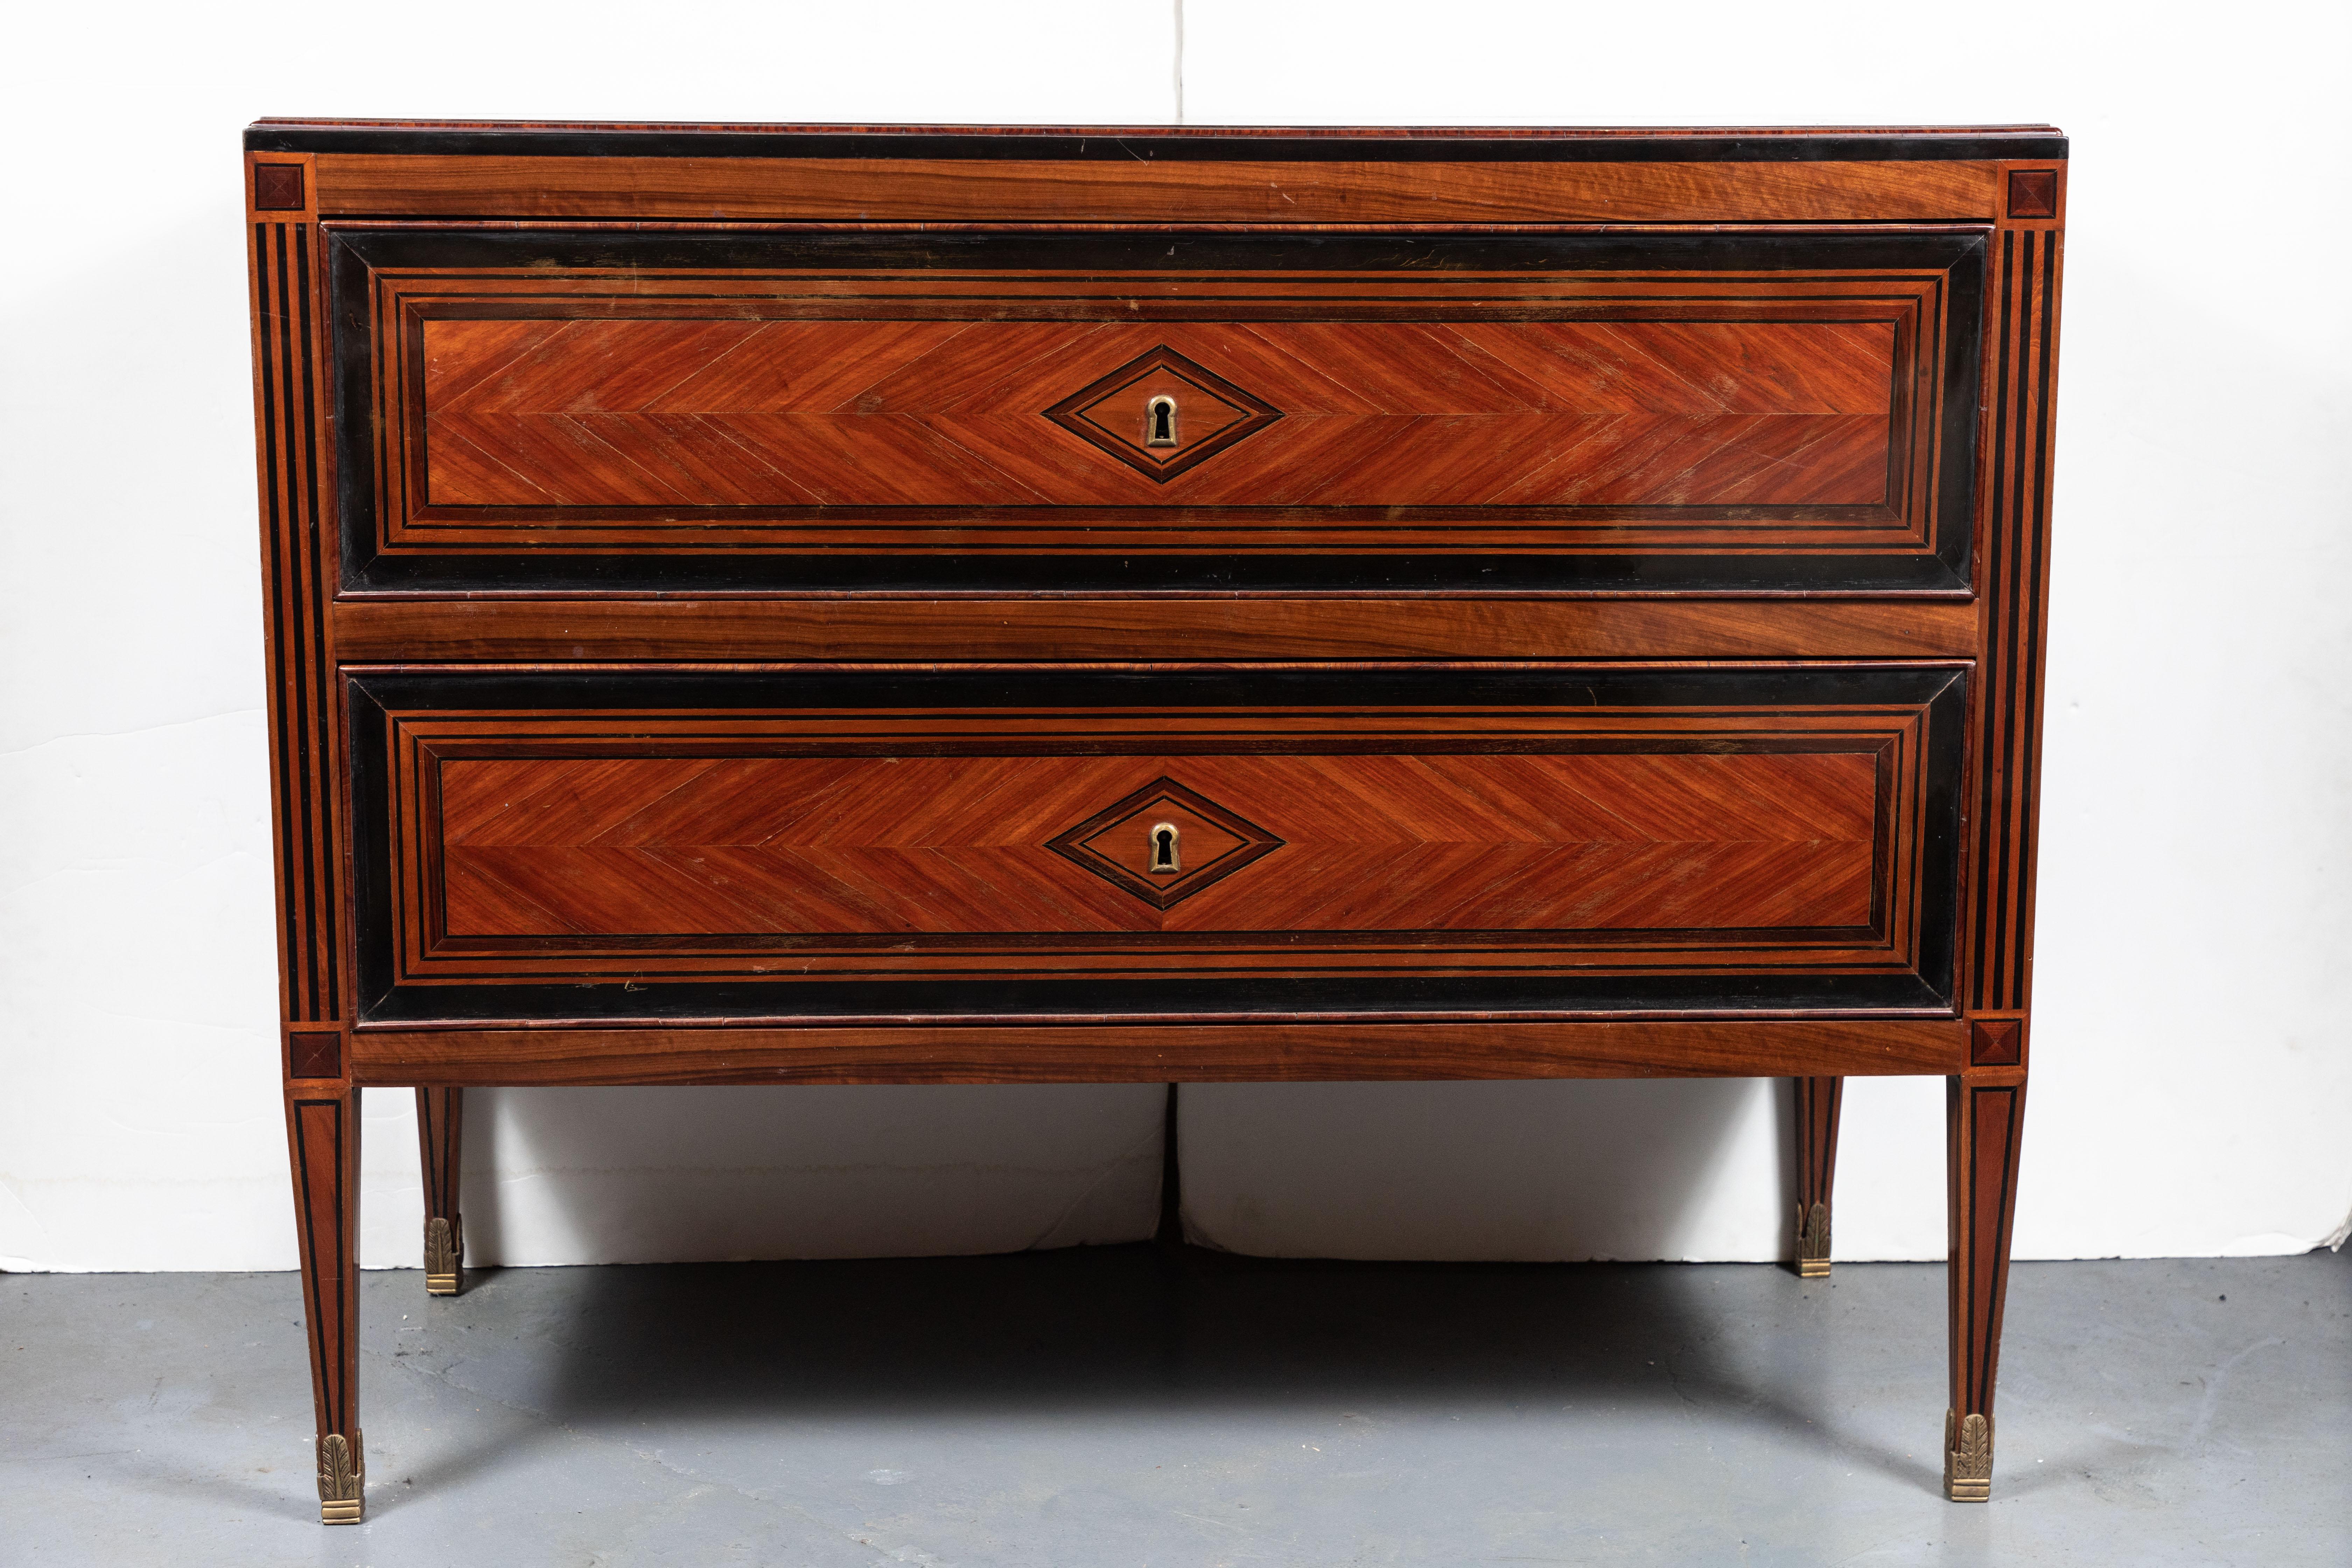 Beautiful, 19th century, inlaid, Tuscan commode in cherry and ebonized wood, fully decorated on three sides. Geometric patterning frame both drawers with a diamond surrounding the escutcheons. The whole on tapered legs.